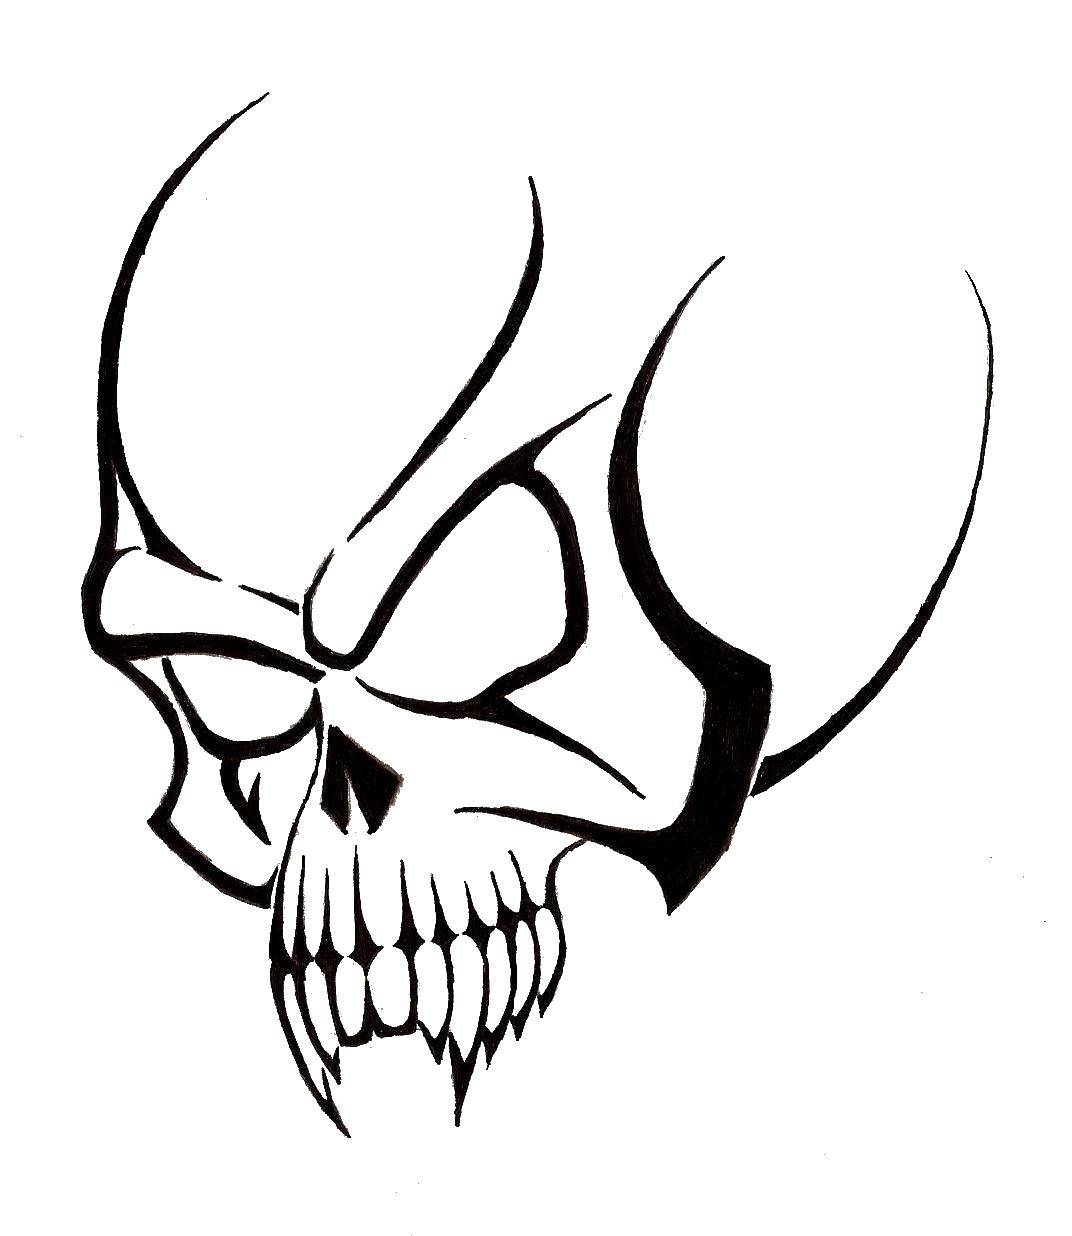 Coloring The contour of the skull. Category skull. Tags:  outline , skull, teeth.